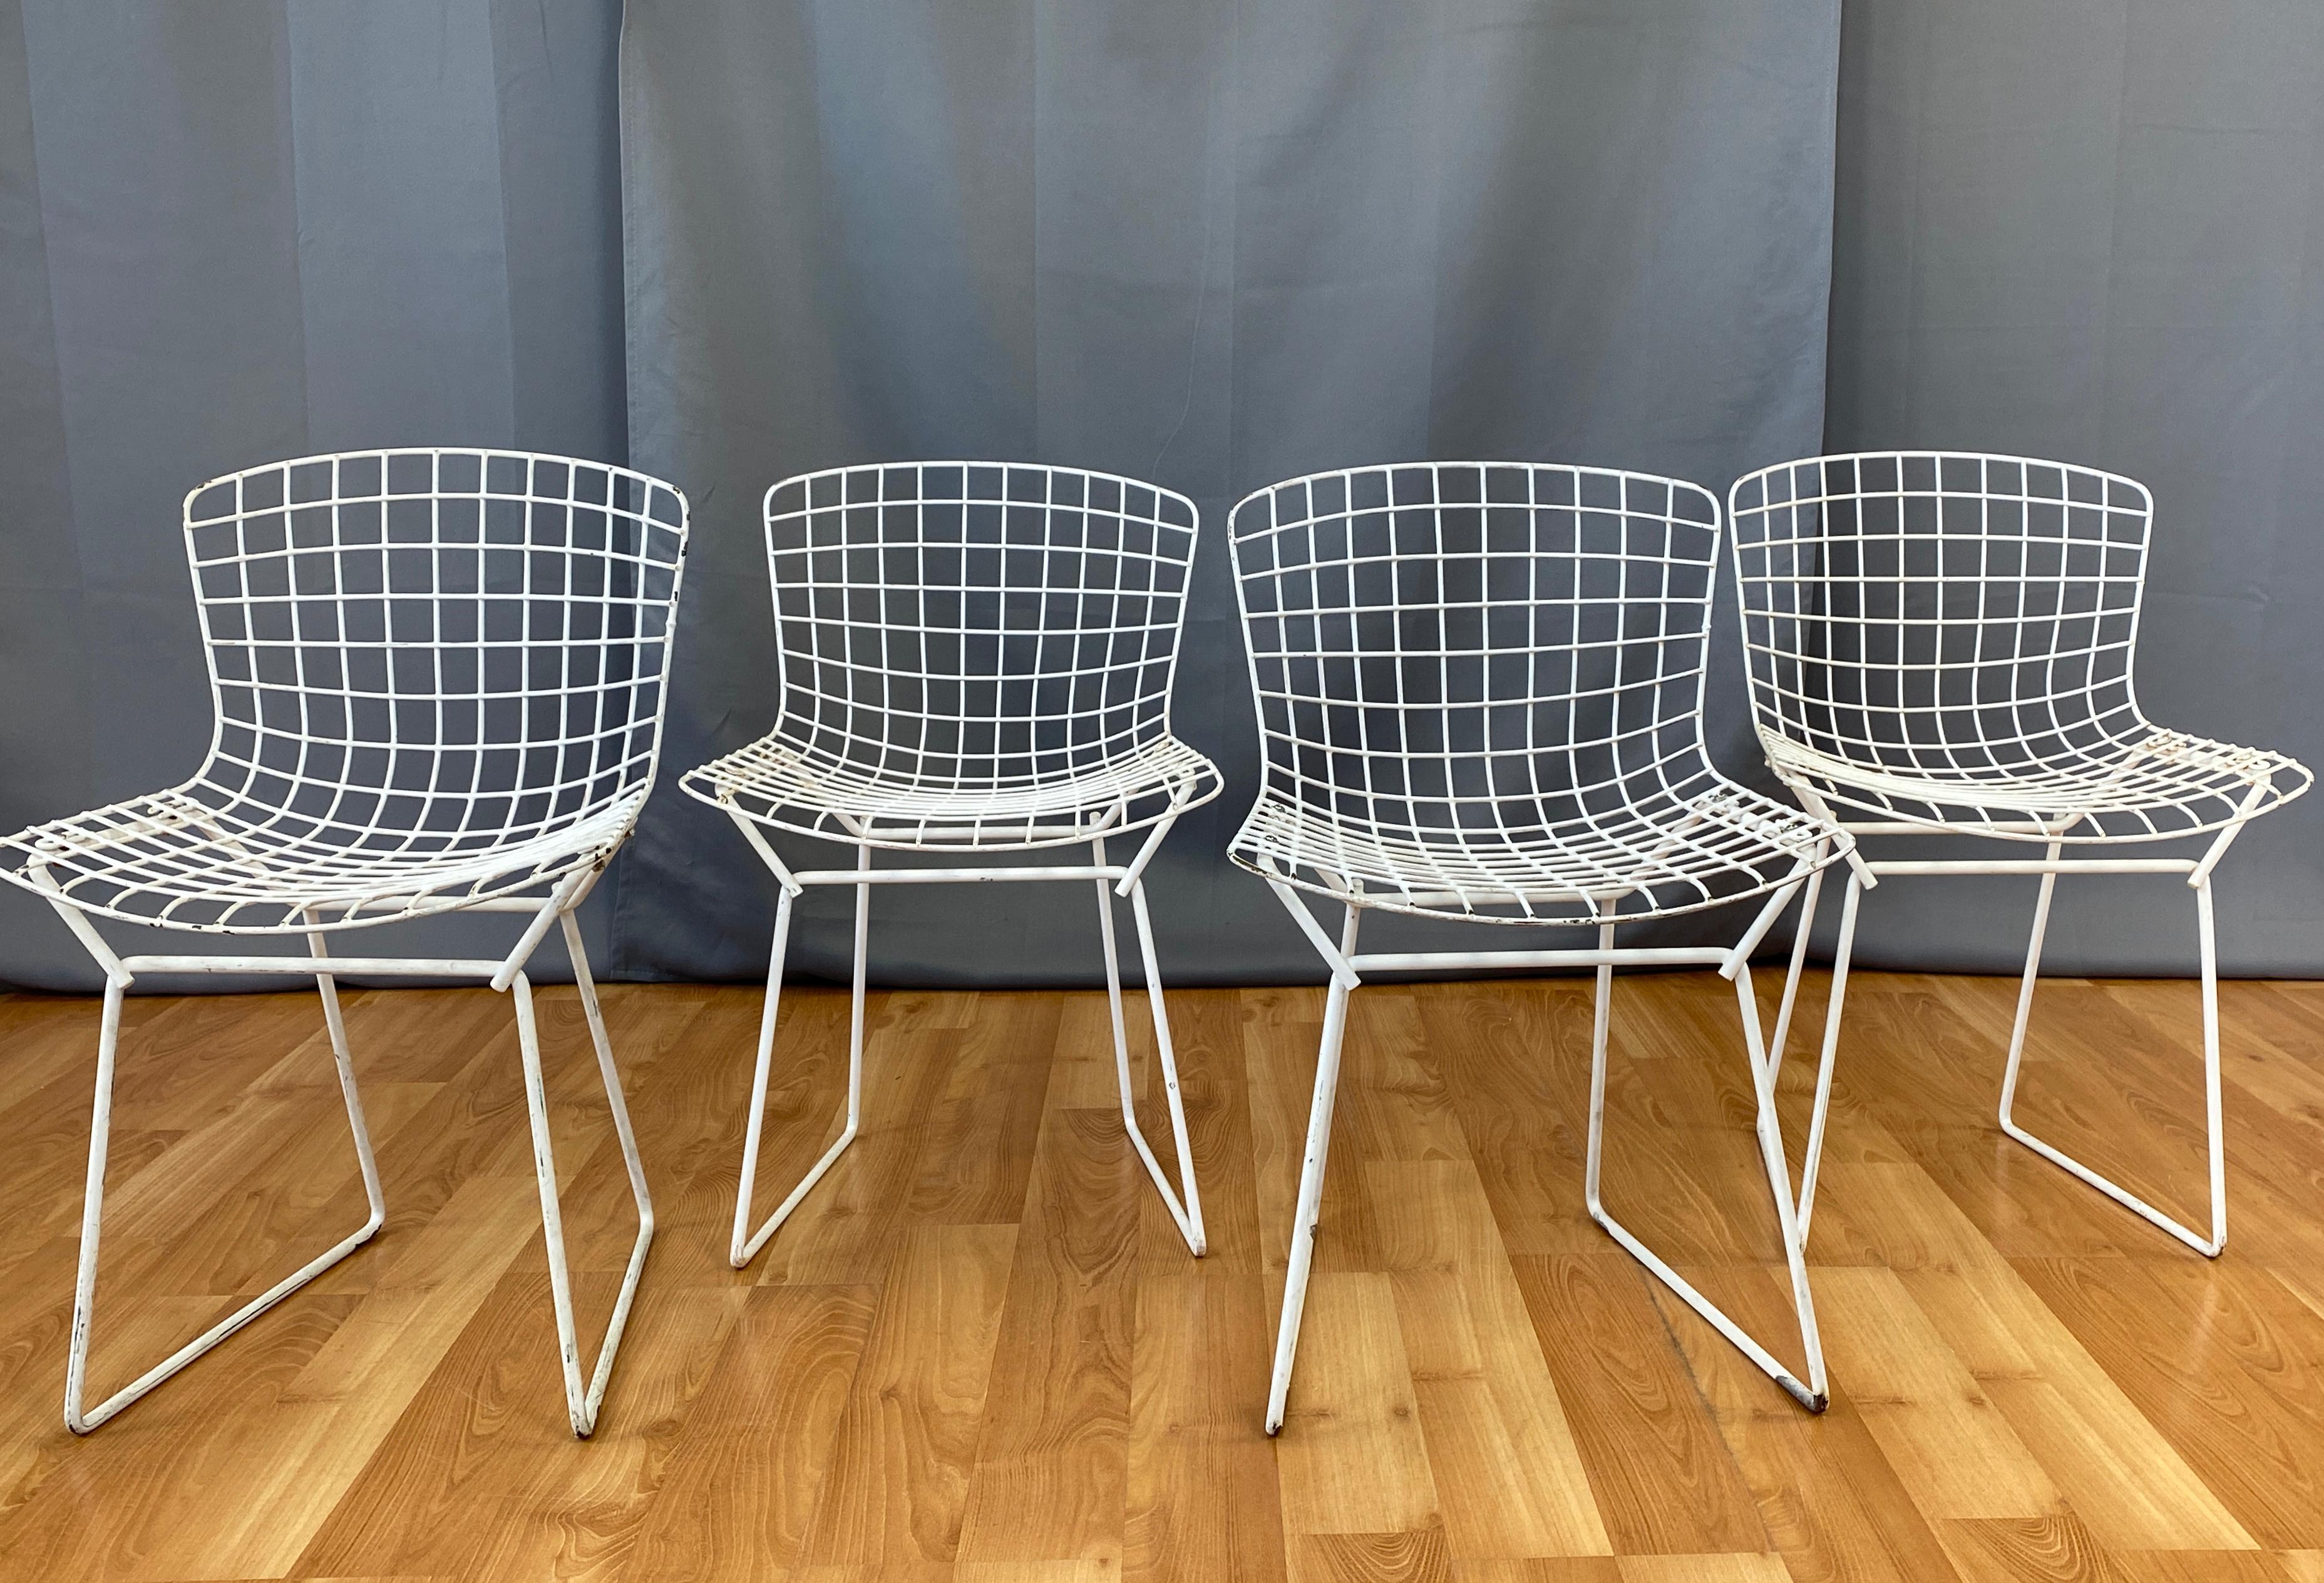 Offered here are four Harry Bertoia designed child chair for Knoll.
First designed in 1950. All are white.